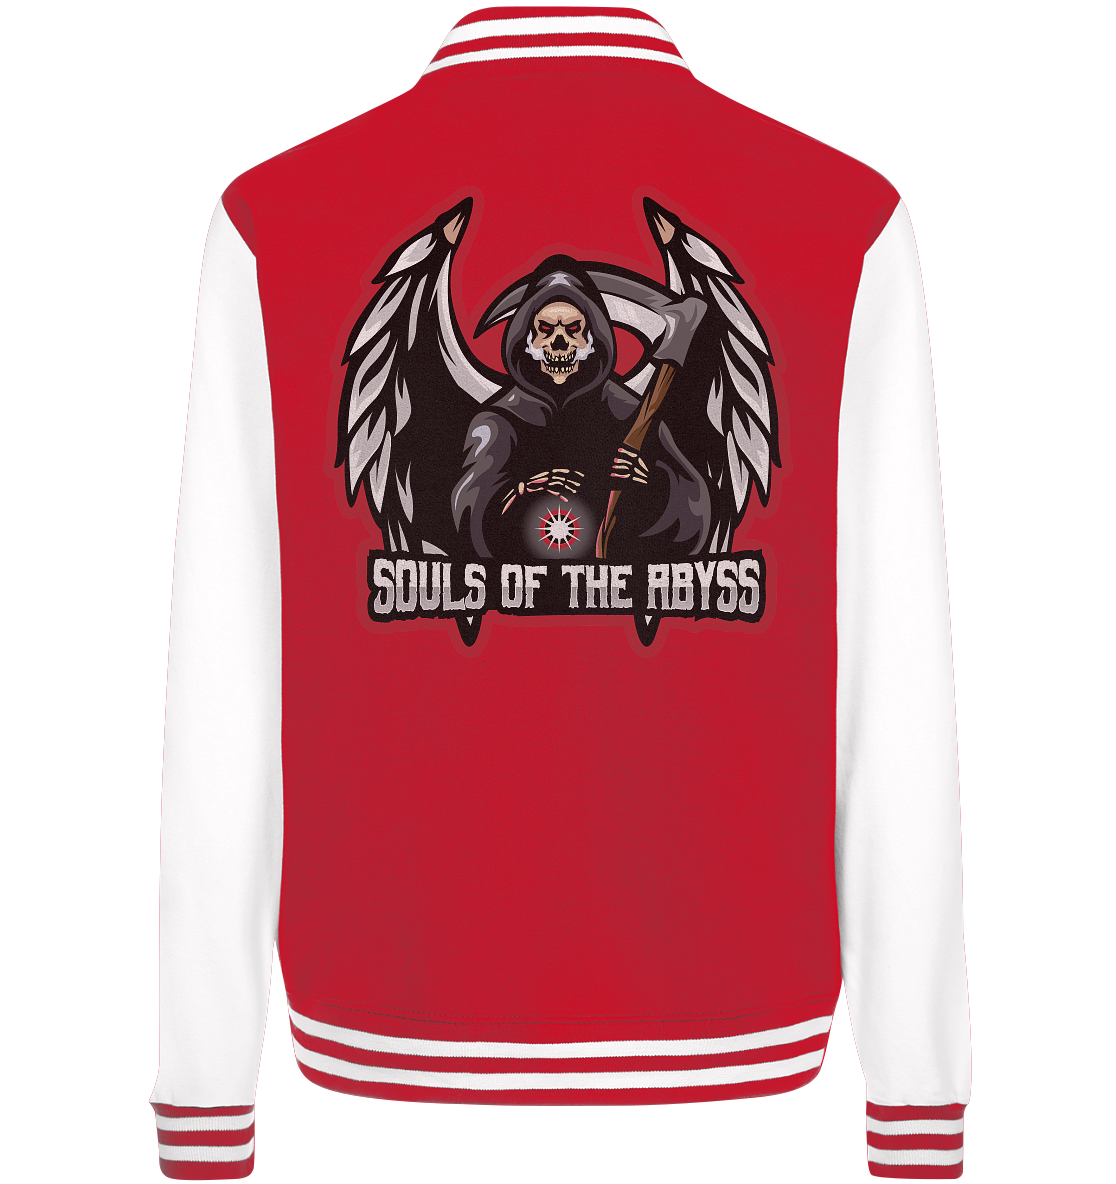 SOULS OF THE ABYSS - Basic College Jacke